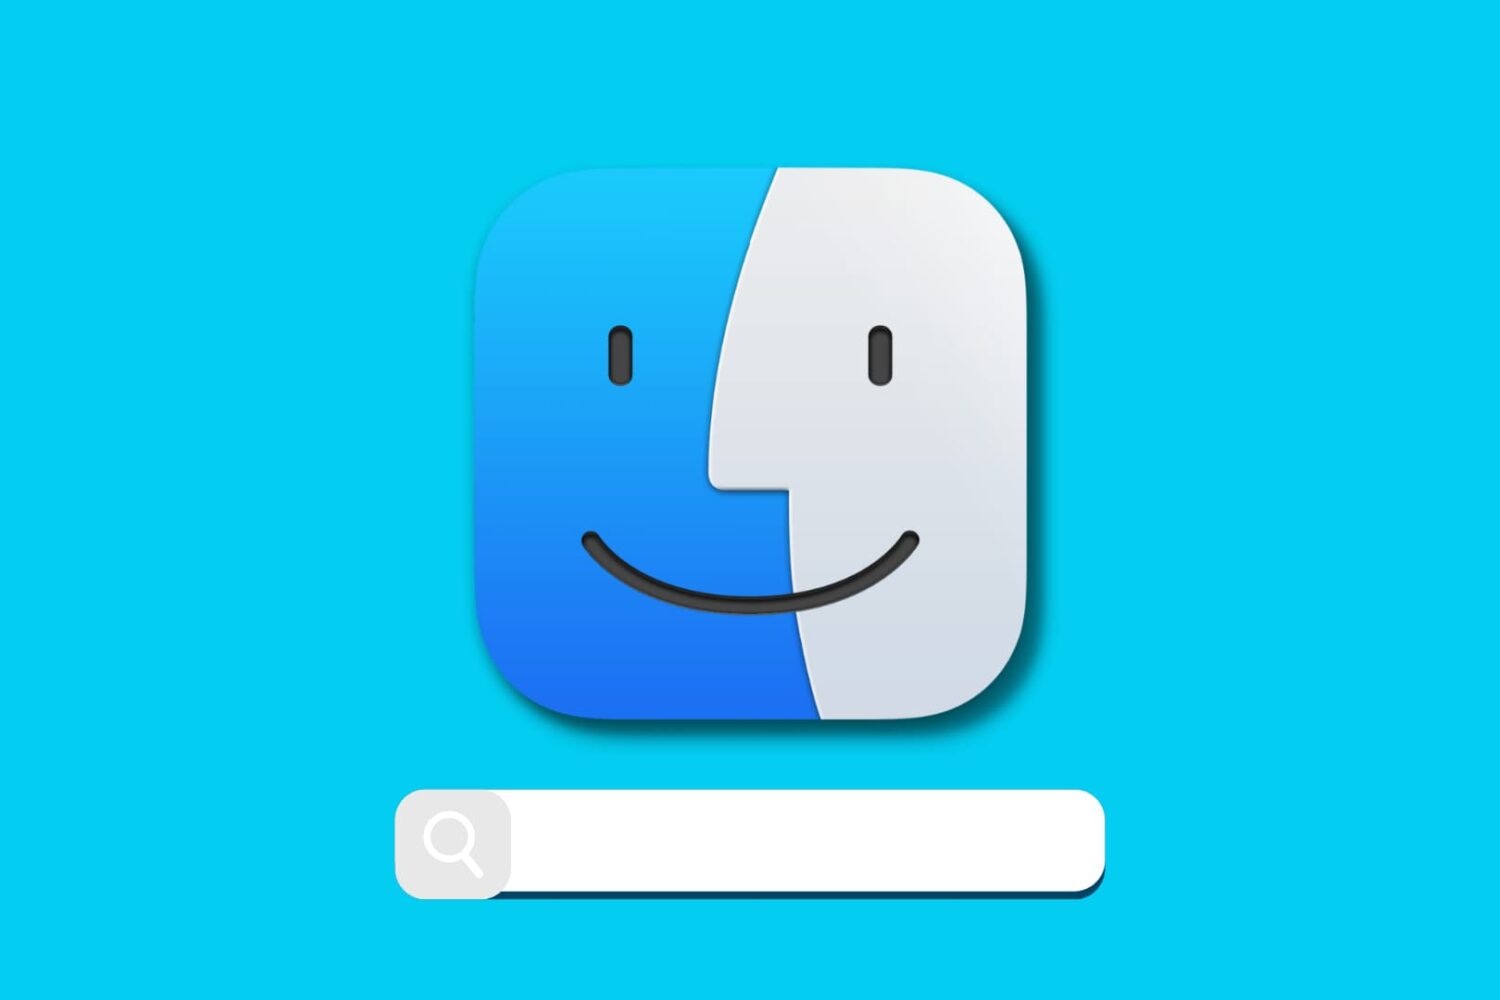 Mac Finder icon with a search bar below it